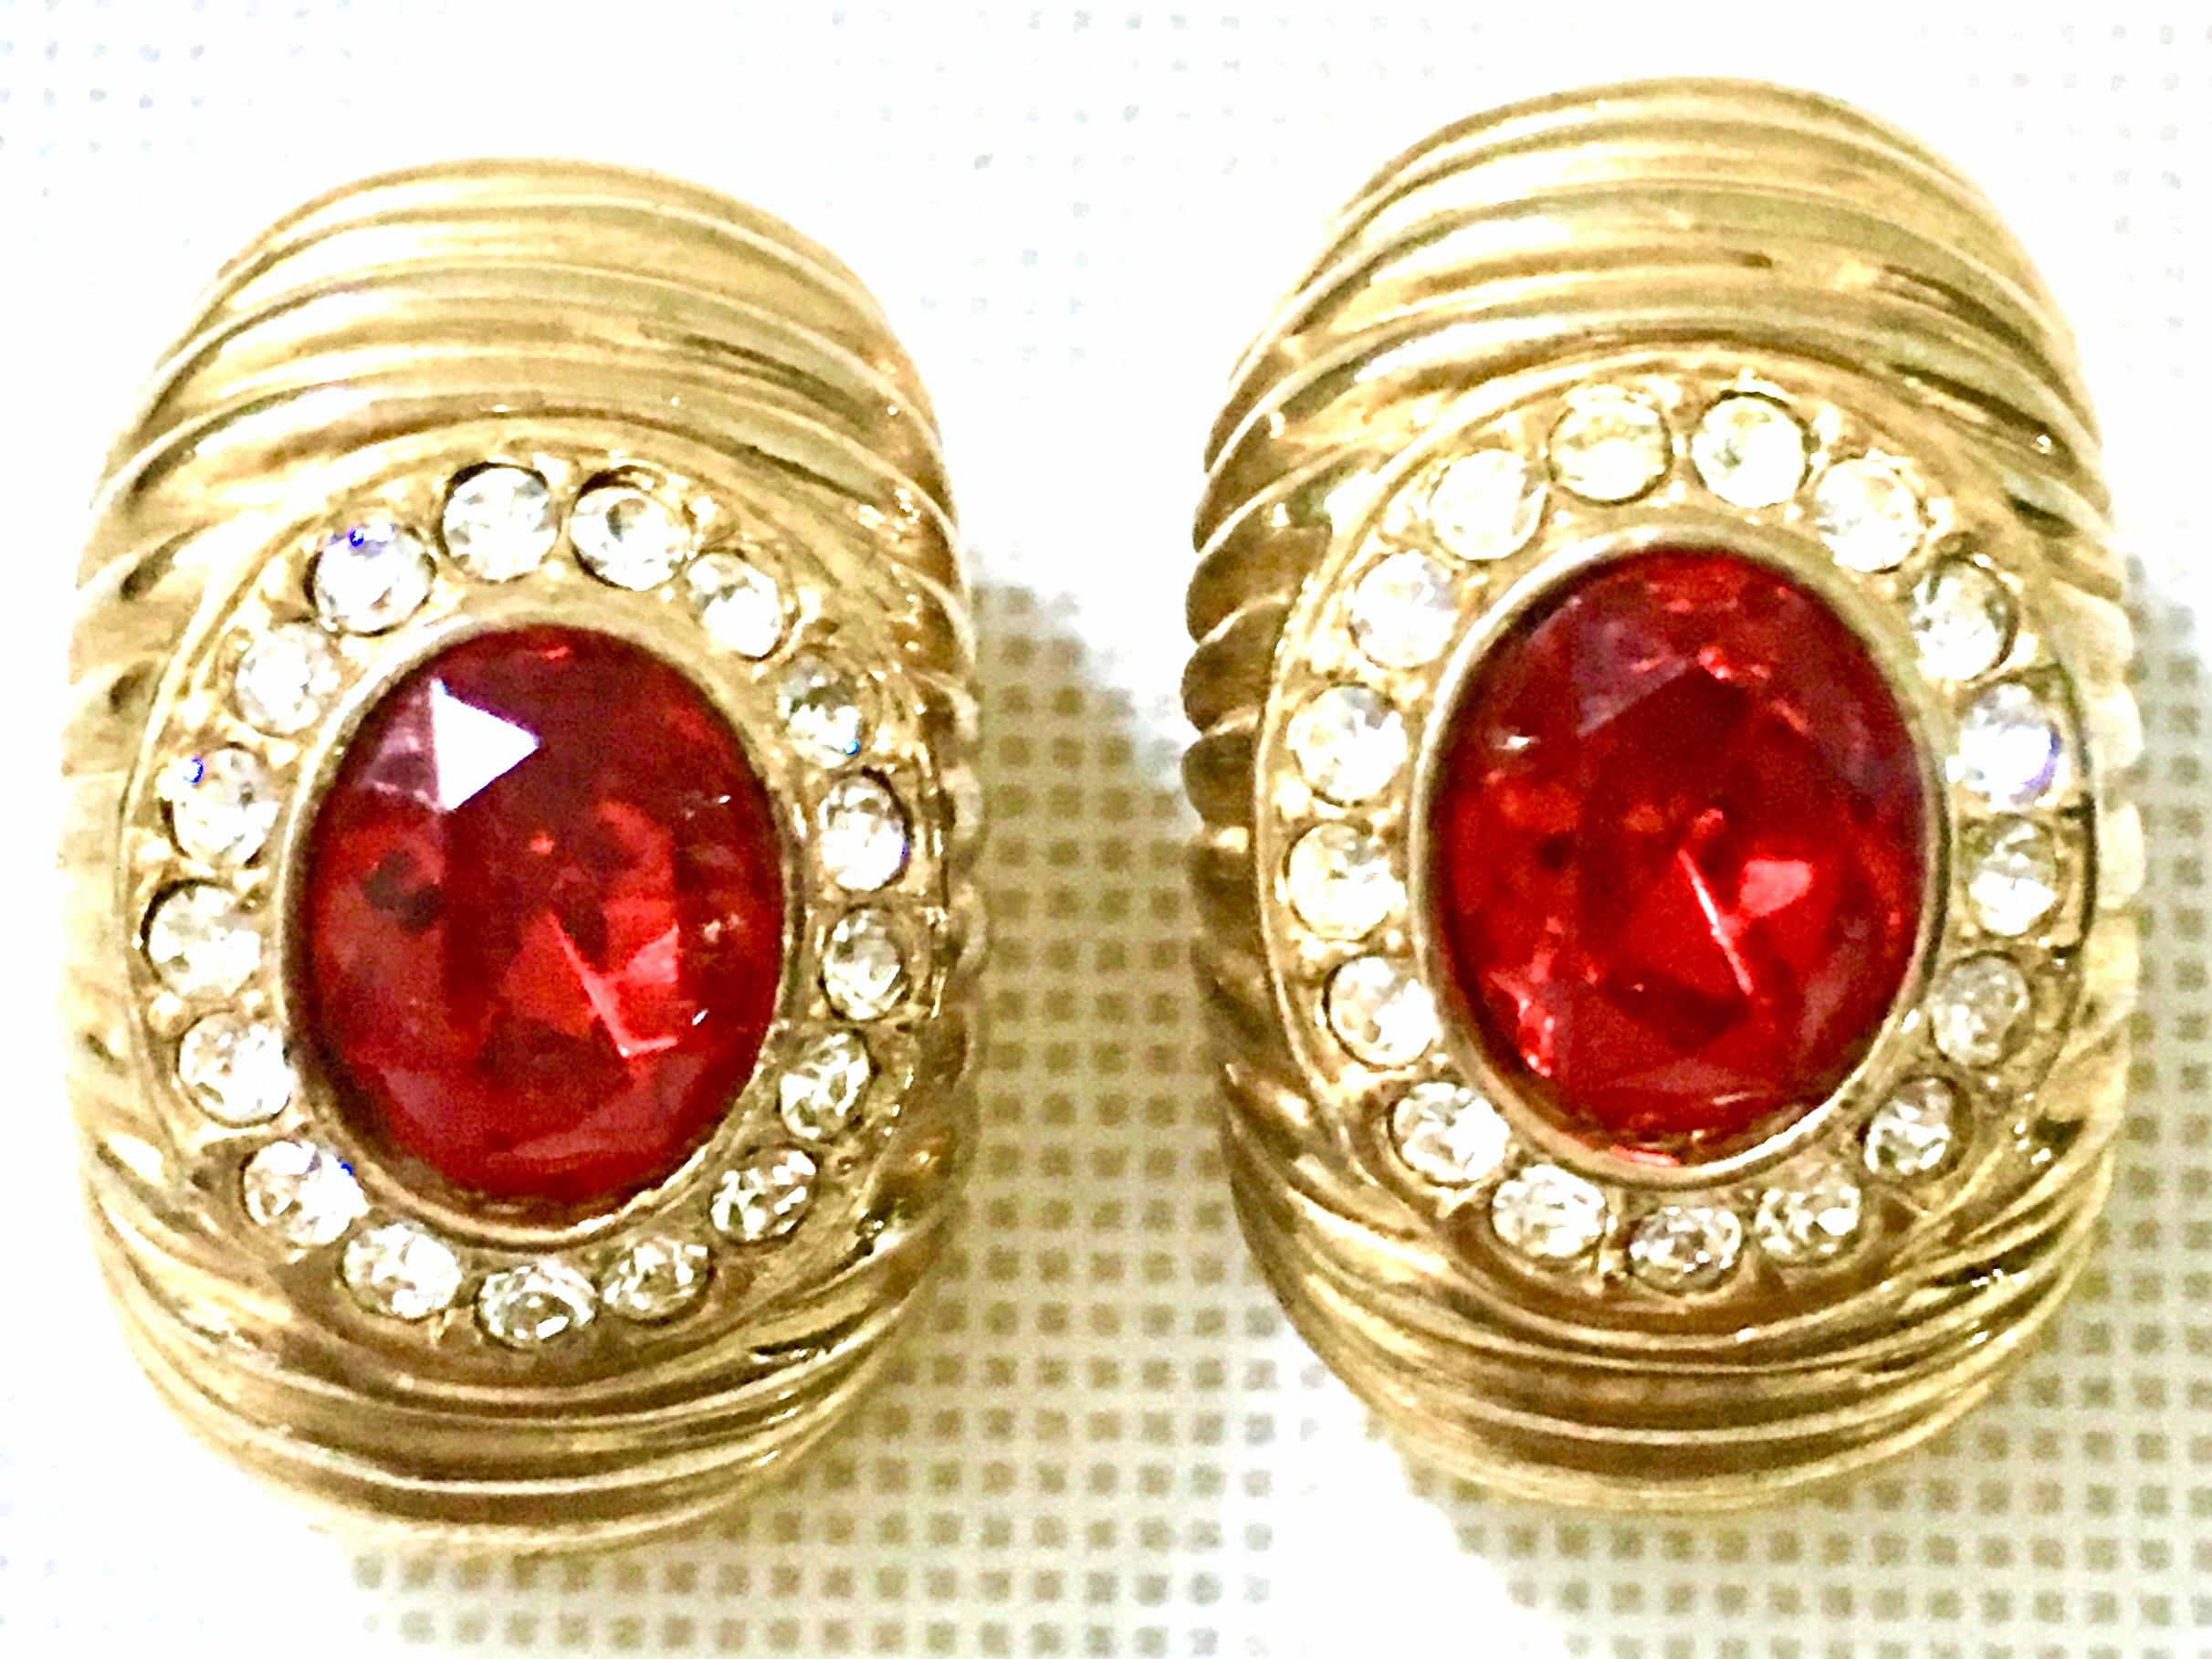 20th Century Gold & Swarovski Earrings By, Christian Dior. These classic and timeless earrings feature a curved and dimensional shape. Executed in gold plate metal with ridge detail and a large central ruby red cabochon stone surrounded by colorless